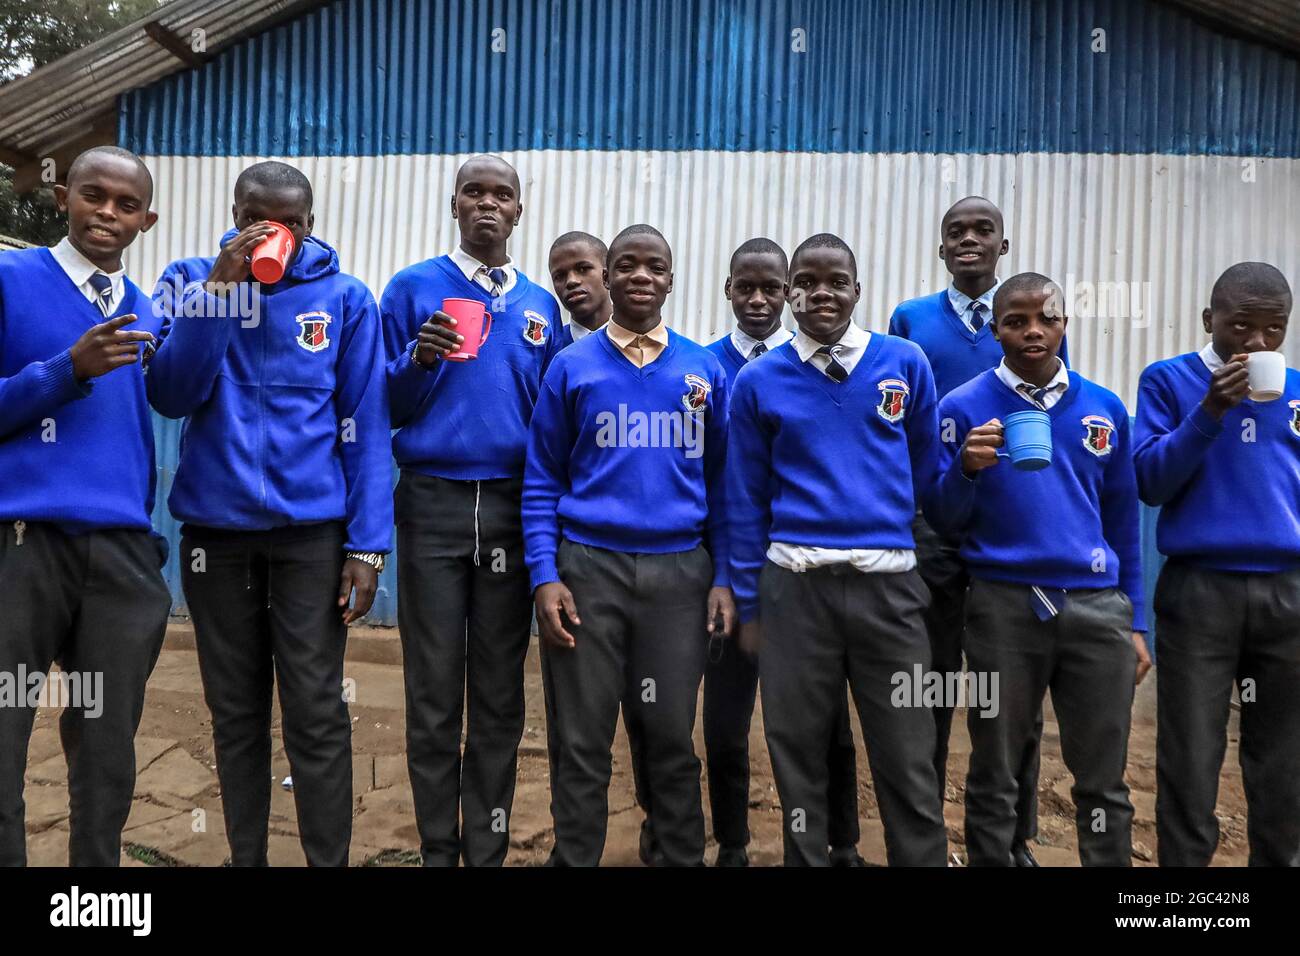 Nairobi, Kenya. 30th July, 2021. The 18-year-old Saviour Omondi, a local artist (C) takes a photo with his school mates outside his school compound in Raila Educational Centre in Nairobi.An 18-year-old artist born and raised in Kibera, from a family of five, he began his love for art back in 2009 by copying and learning most skills from his dad who was doing art but not to a professional level. Omondi's main focus was to portray his home through his artwork and dreamt of making the best out of his art in the future after his studies. (Credit Image: © Donwilson Odhiambo/SOPA Images via ZUMA Pr Stock Photo